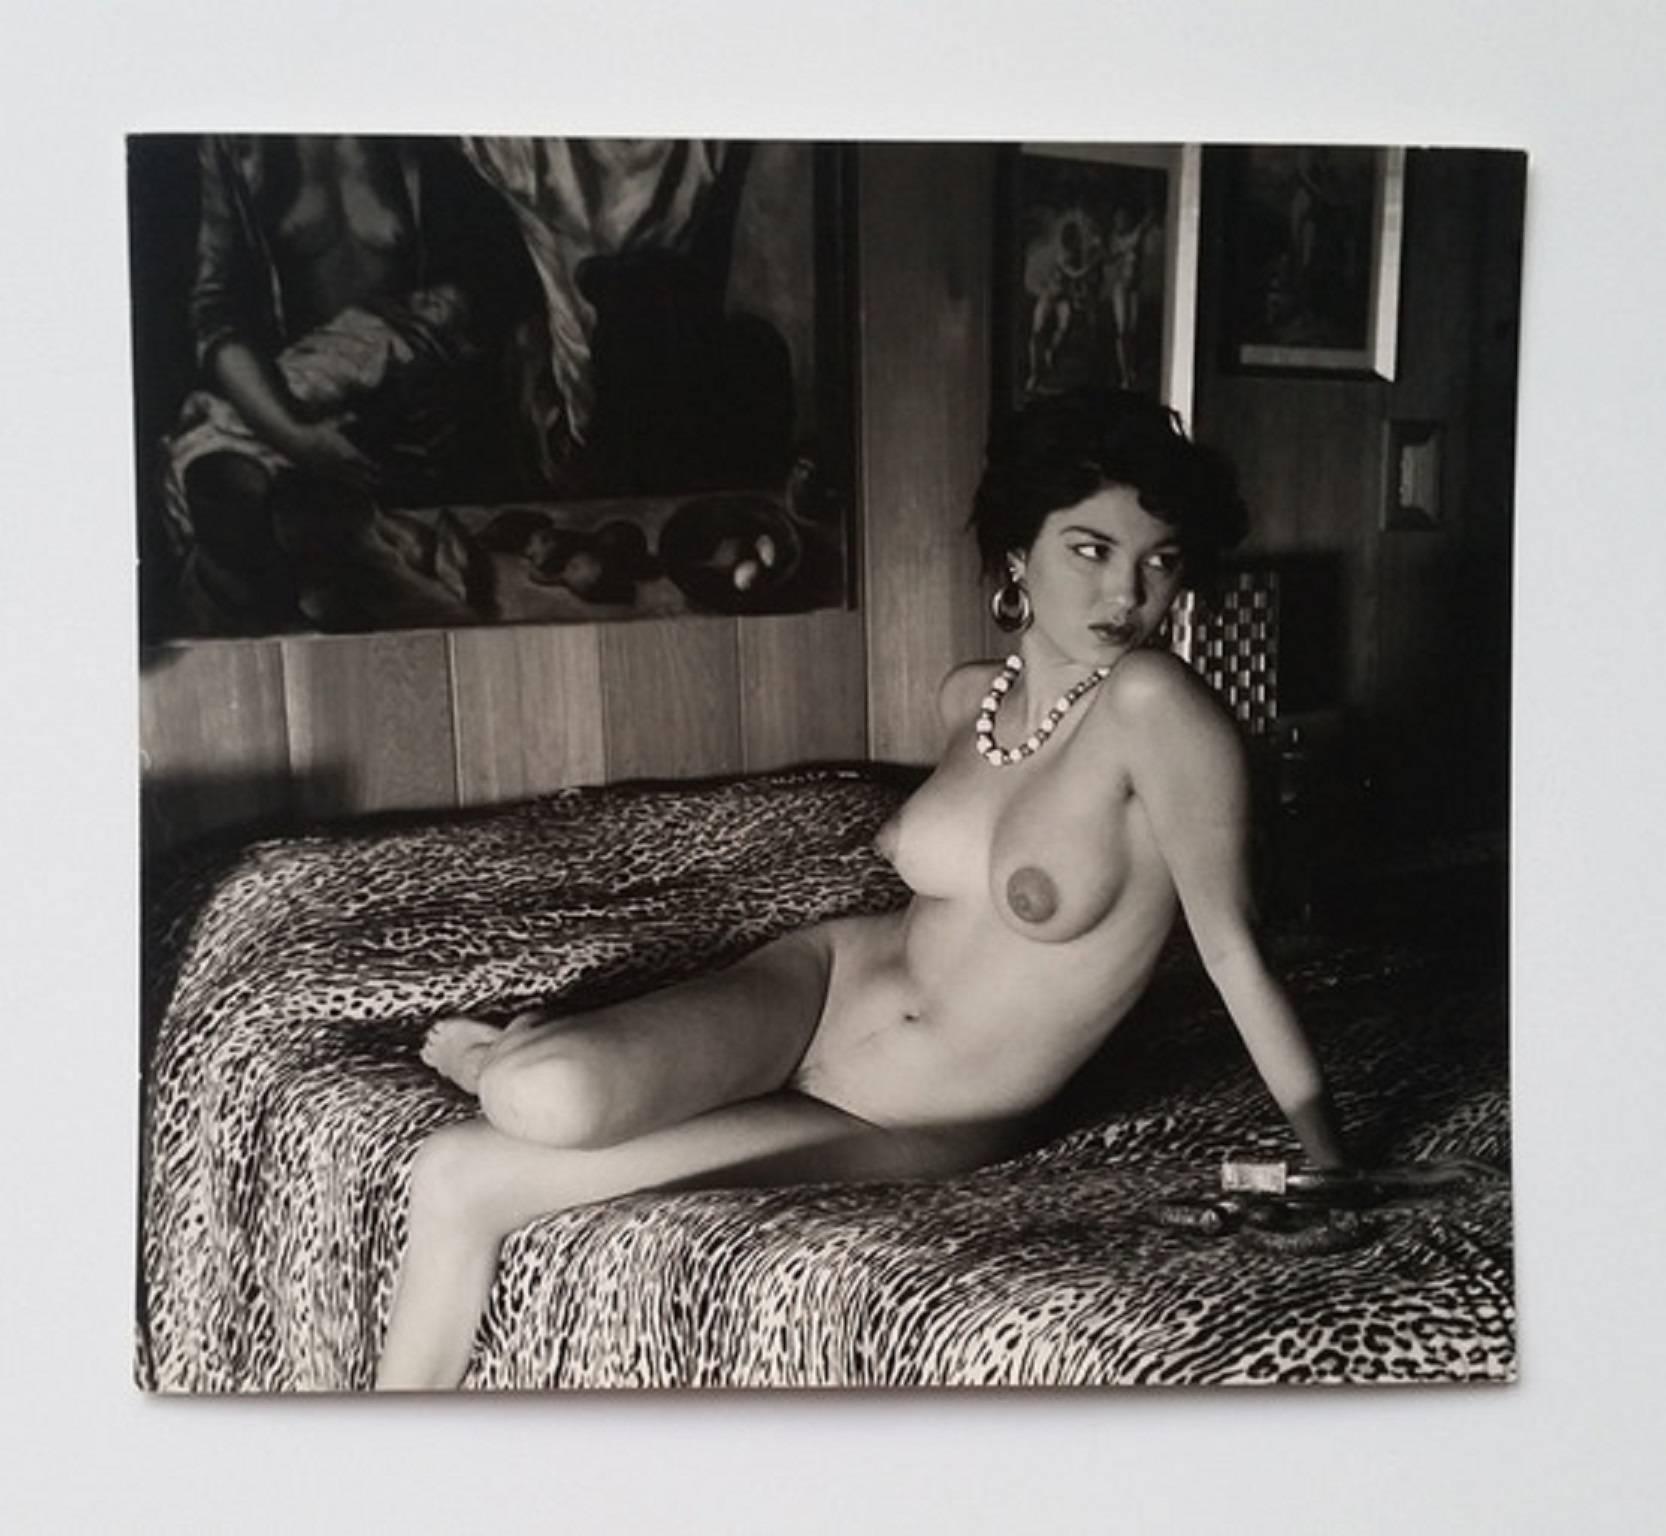 Nude on the Bed - Photograph by Andre de Dienes